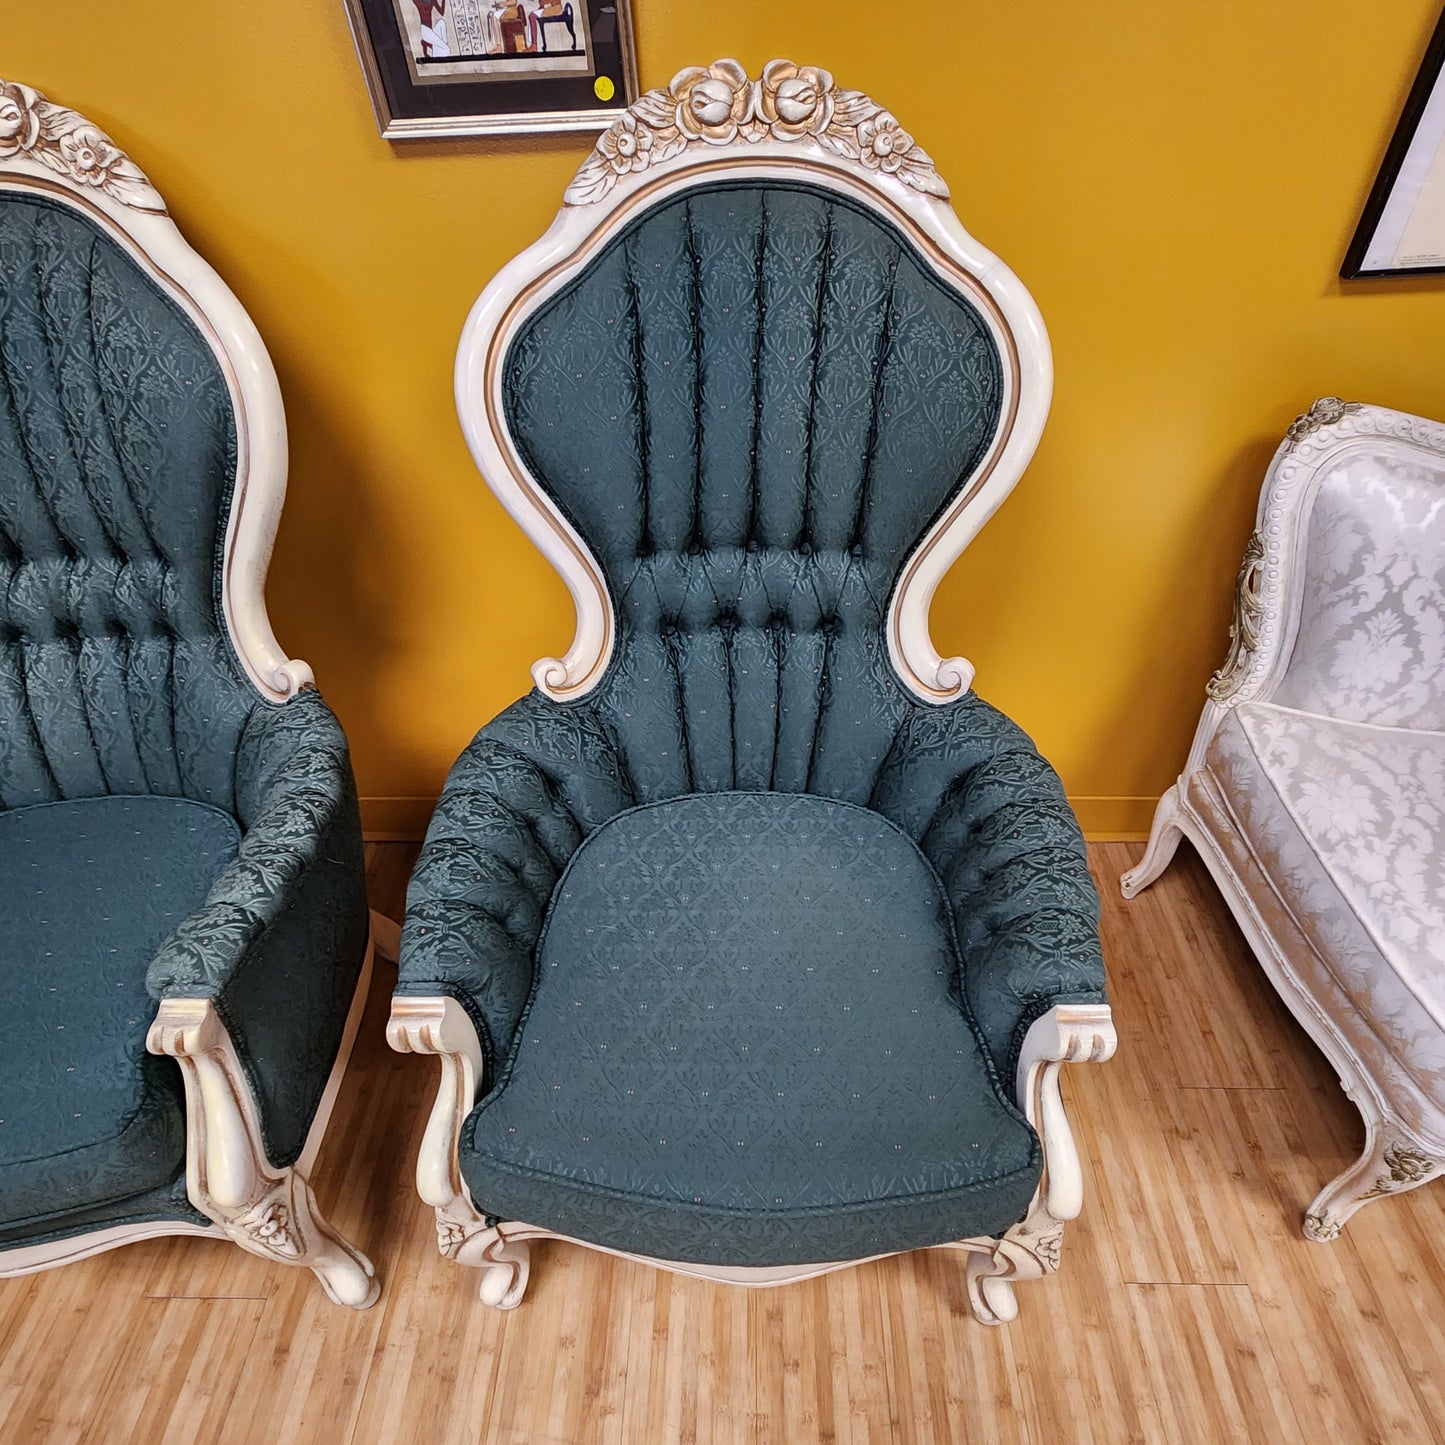 Pair of Vintage French Provincial Style Green High Back Arm Chairs